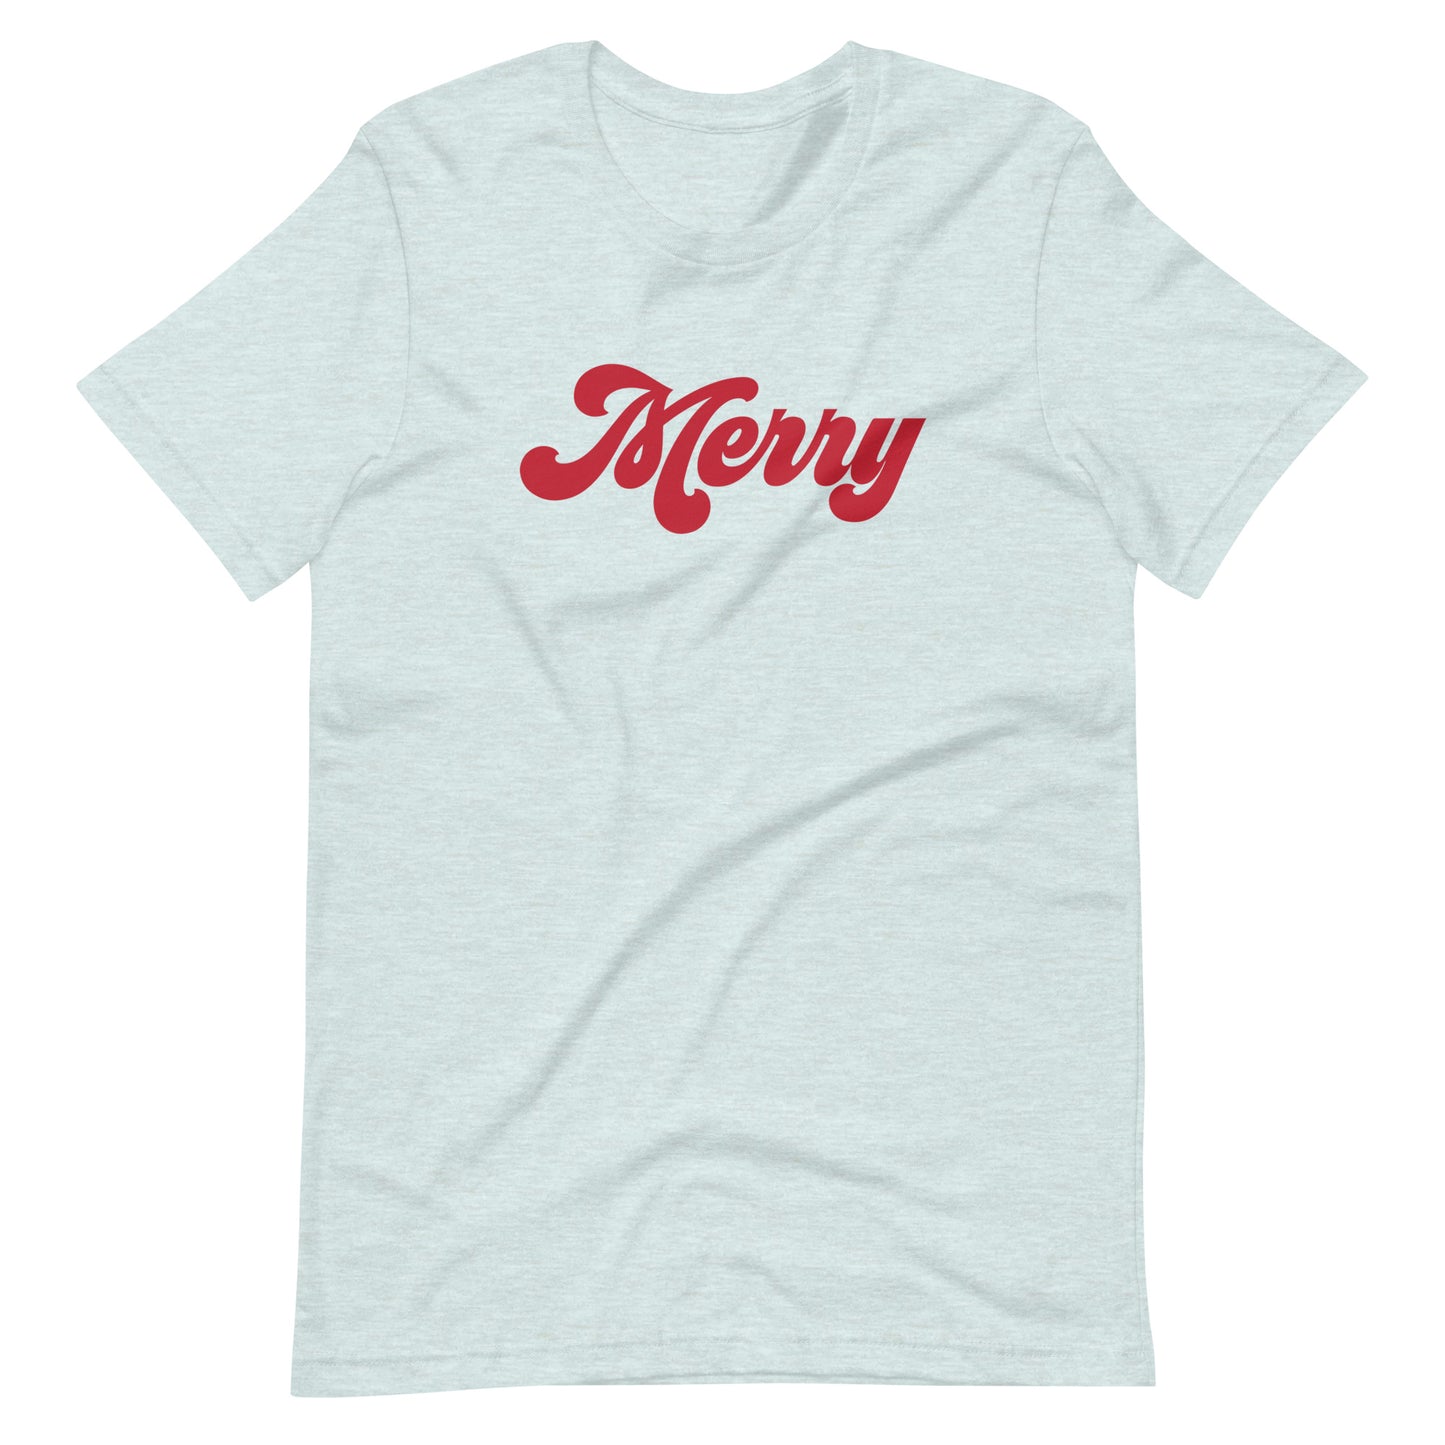 Christmas 70s Merry Short-Sleeve Unisex T-Shirt (more colors available)